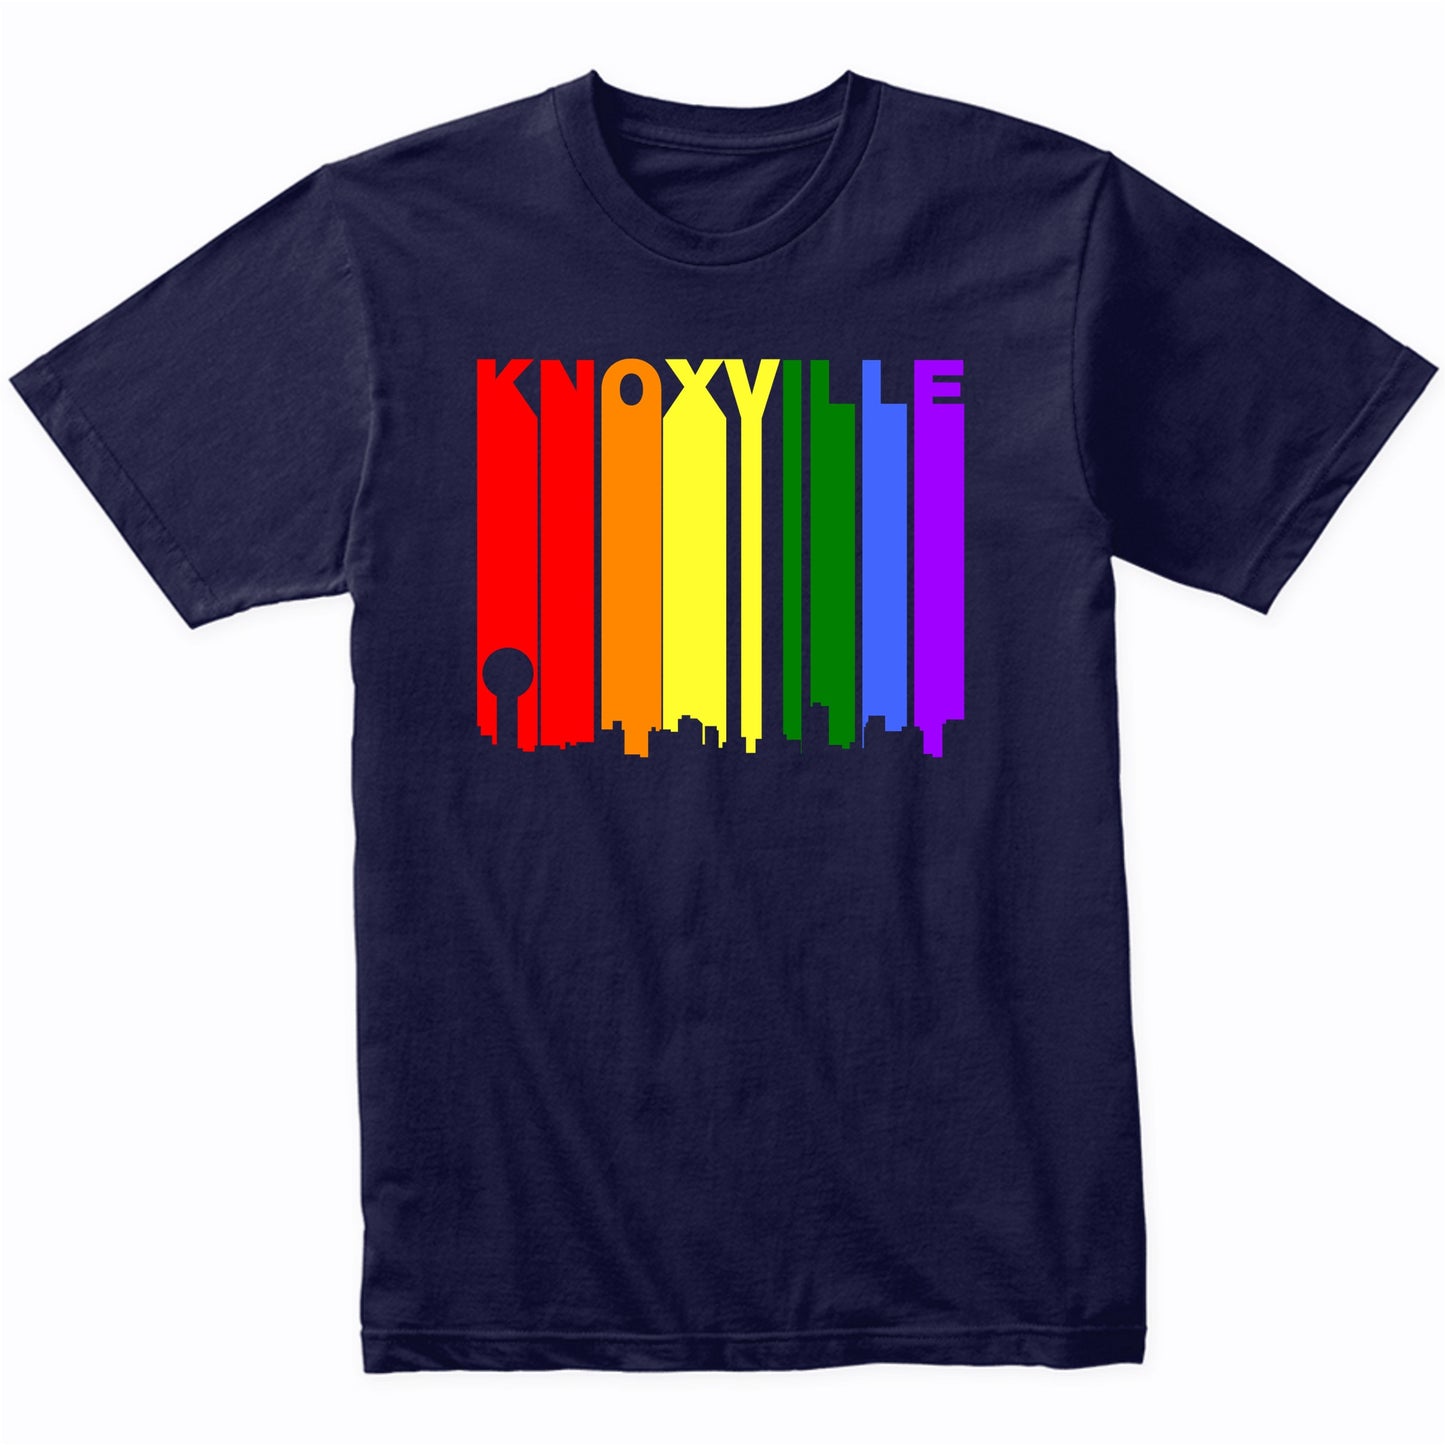 Knoxville Tennessee LGBTQ Gay Pride Rainbow Skyline T-Shirt